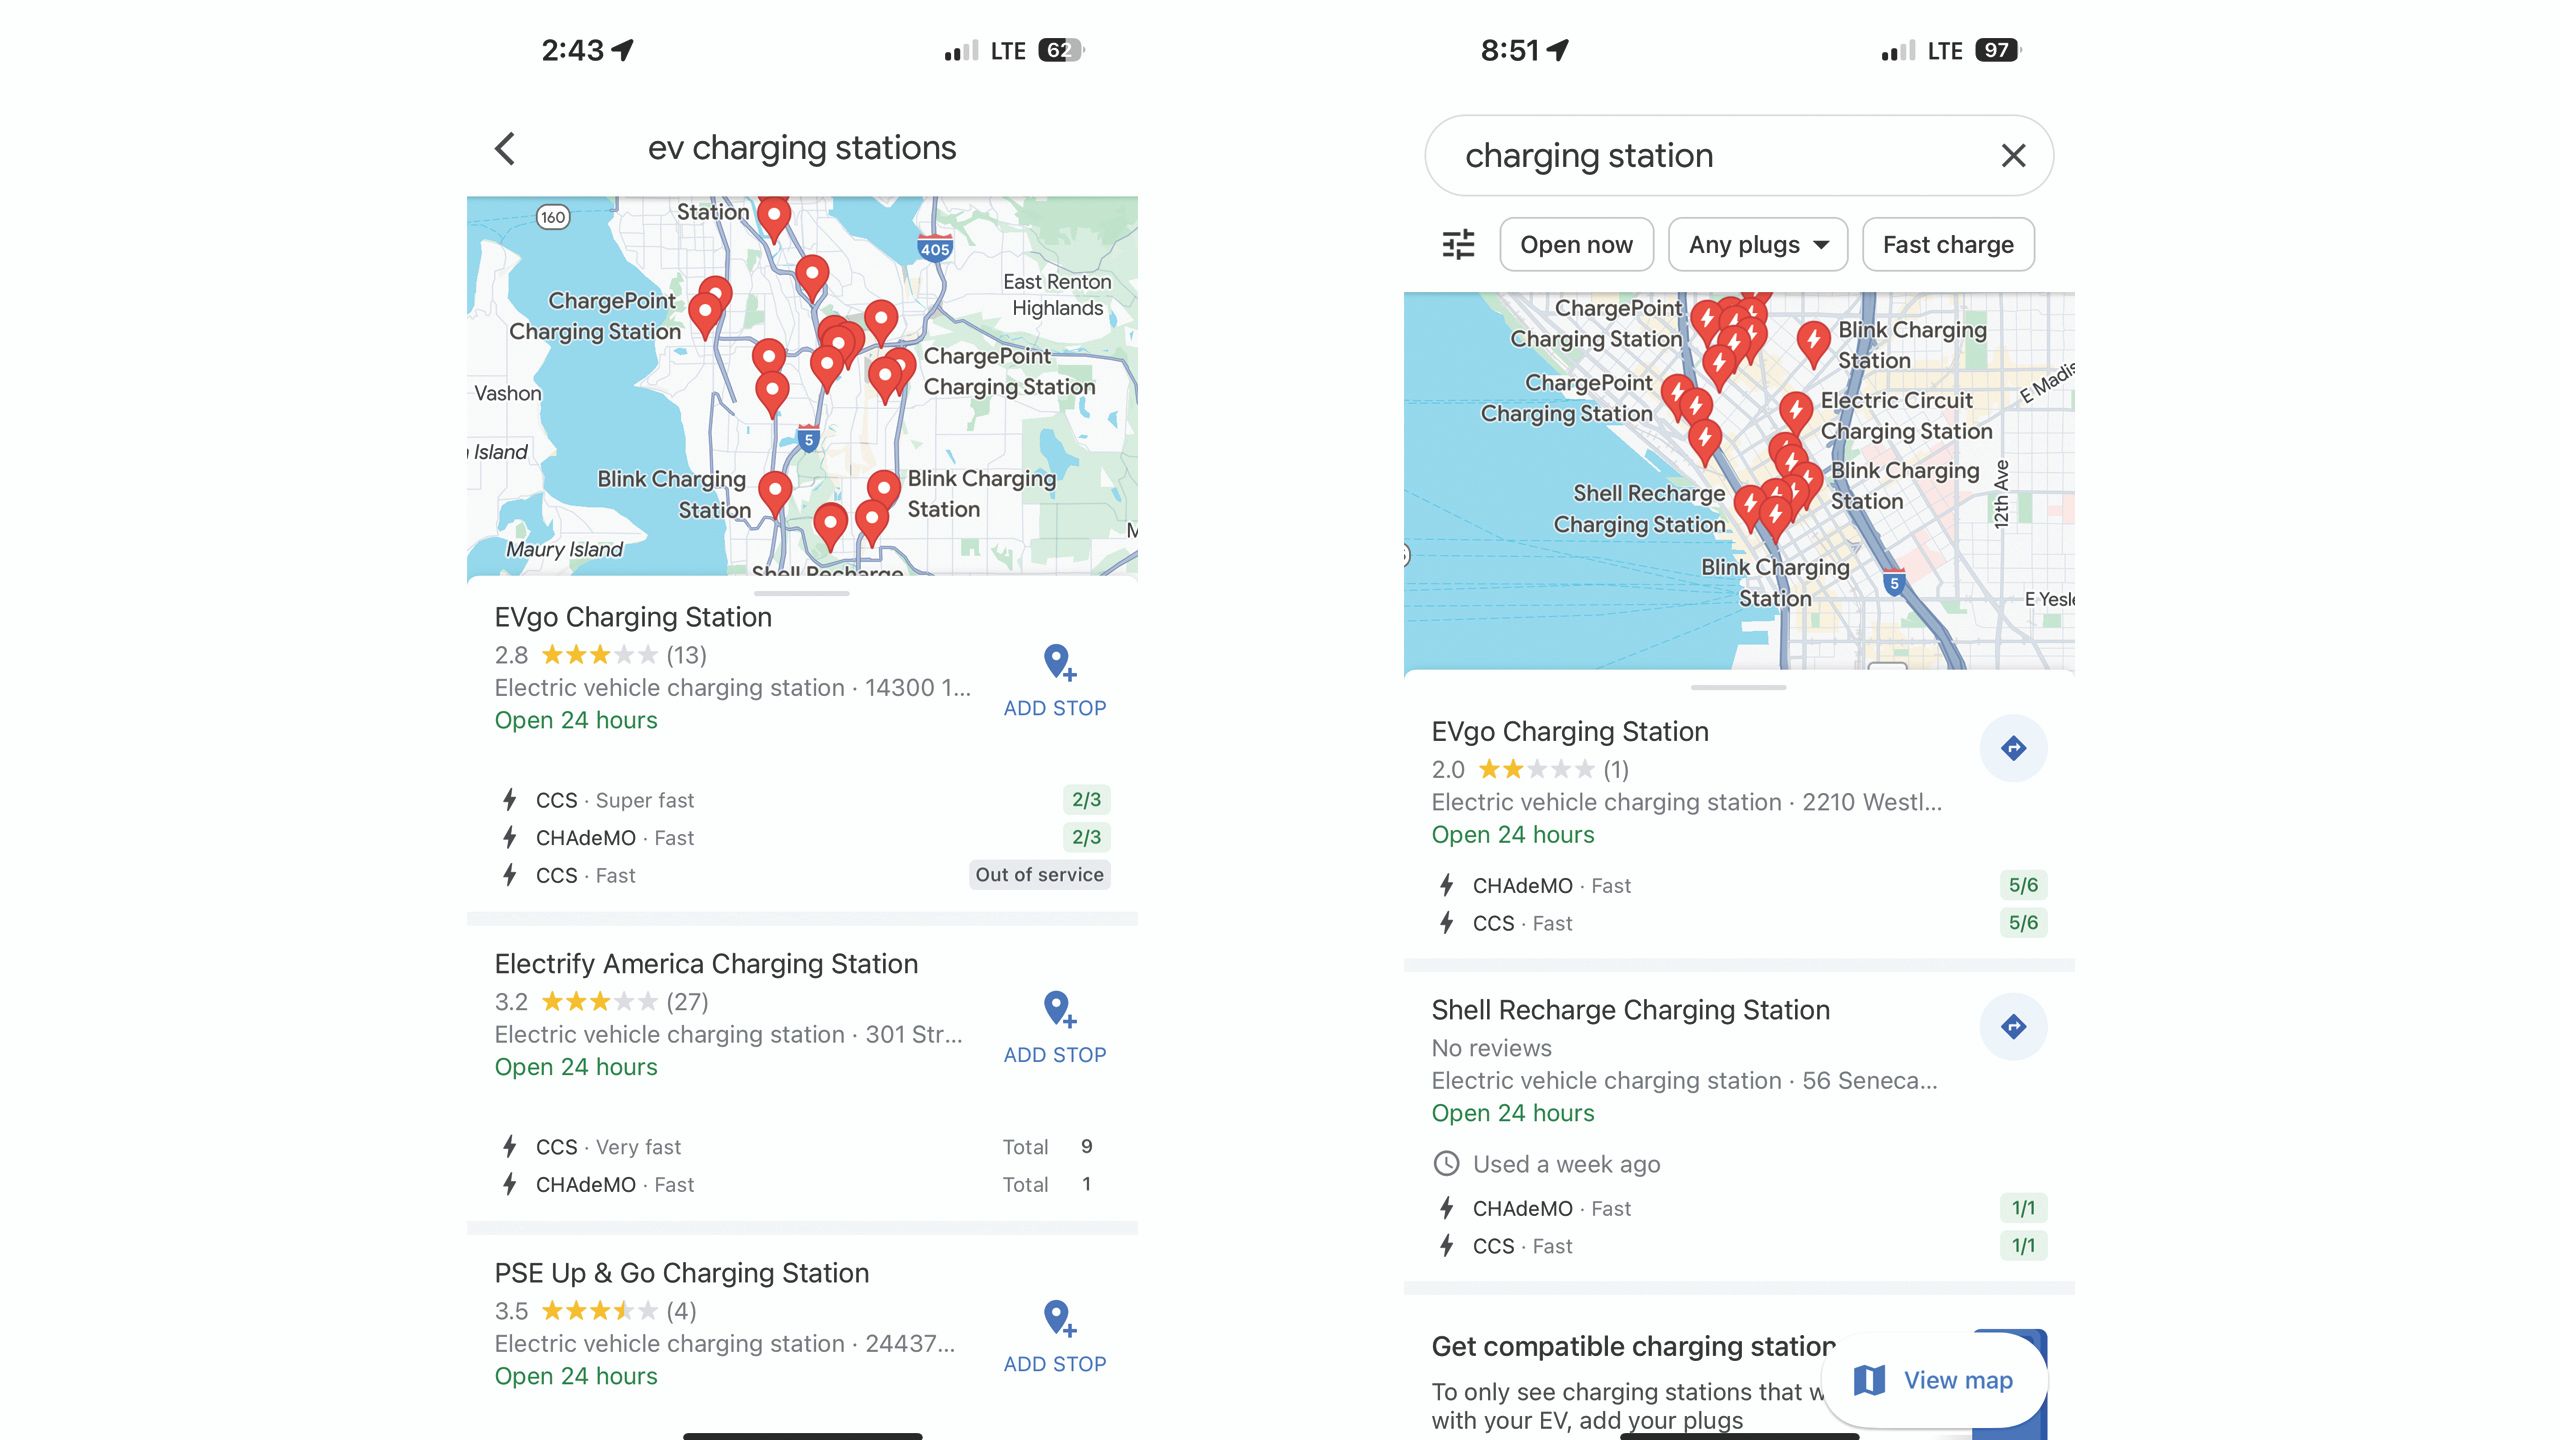 google-maps-ai-features-immersive-view-006